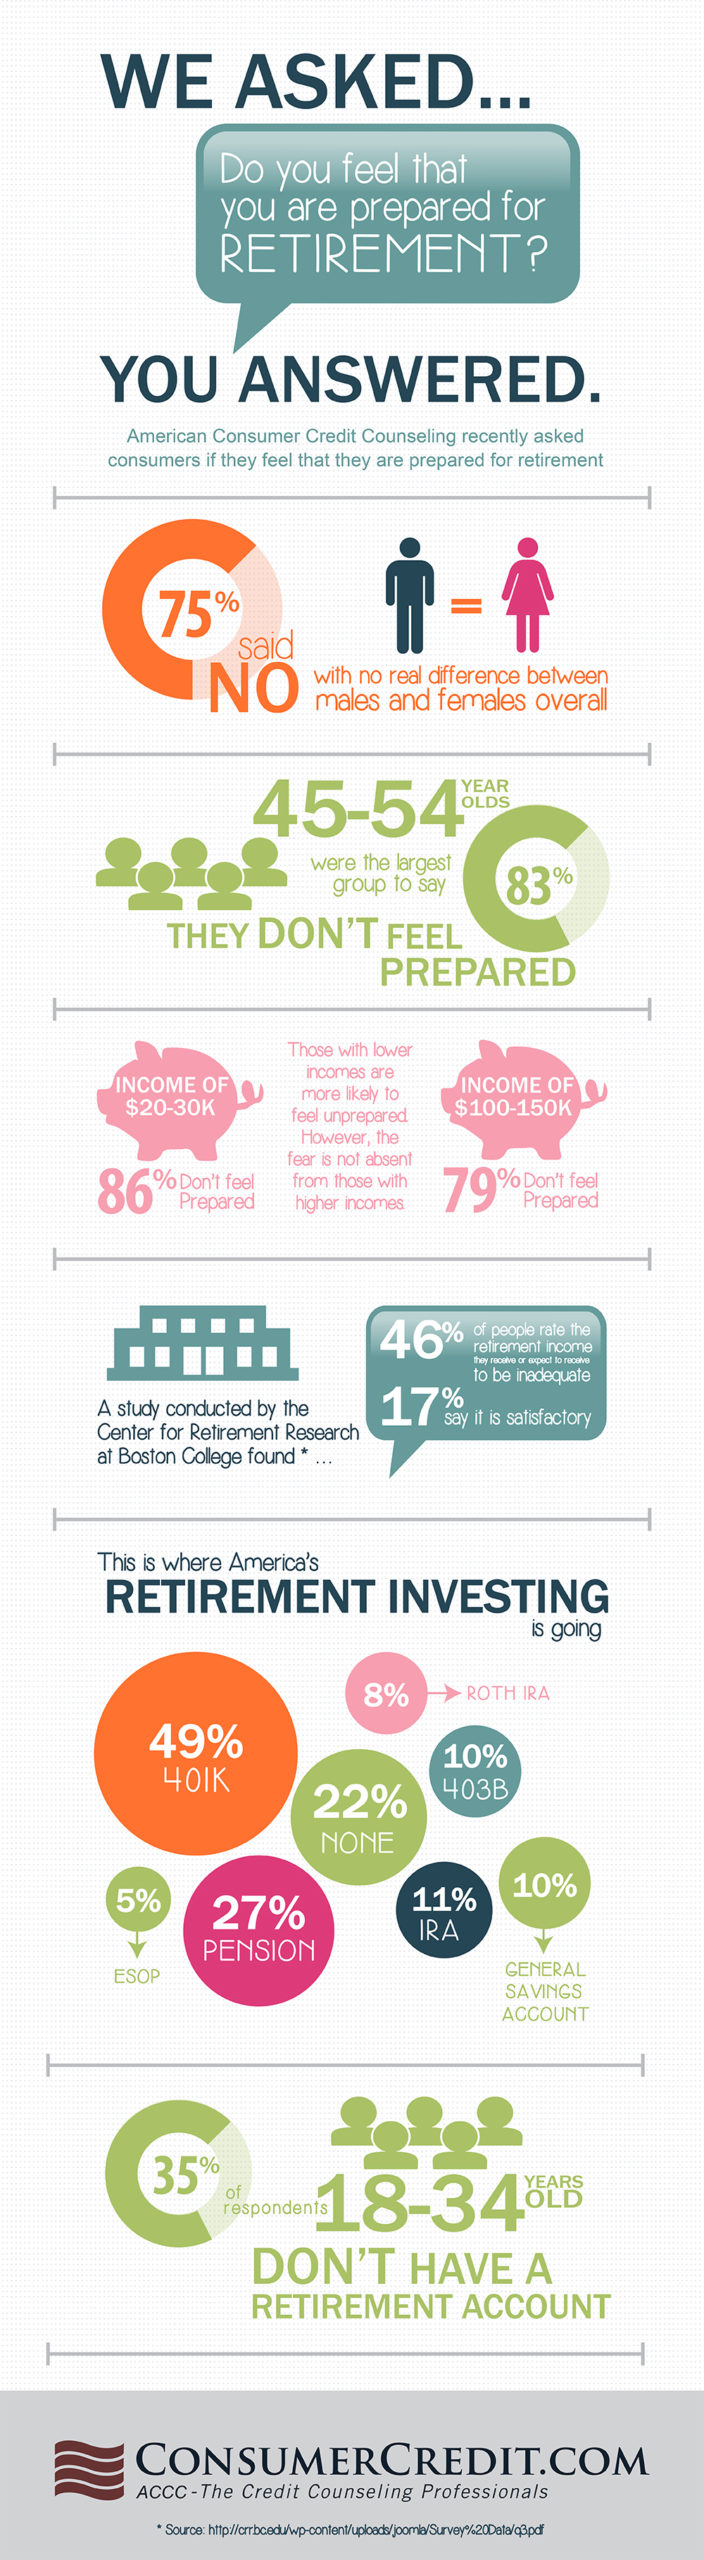 Nearly Three-Quarters Of Americans Admit They Are Not Financially Prepared For Retirement According To New Survey